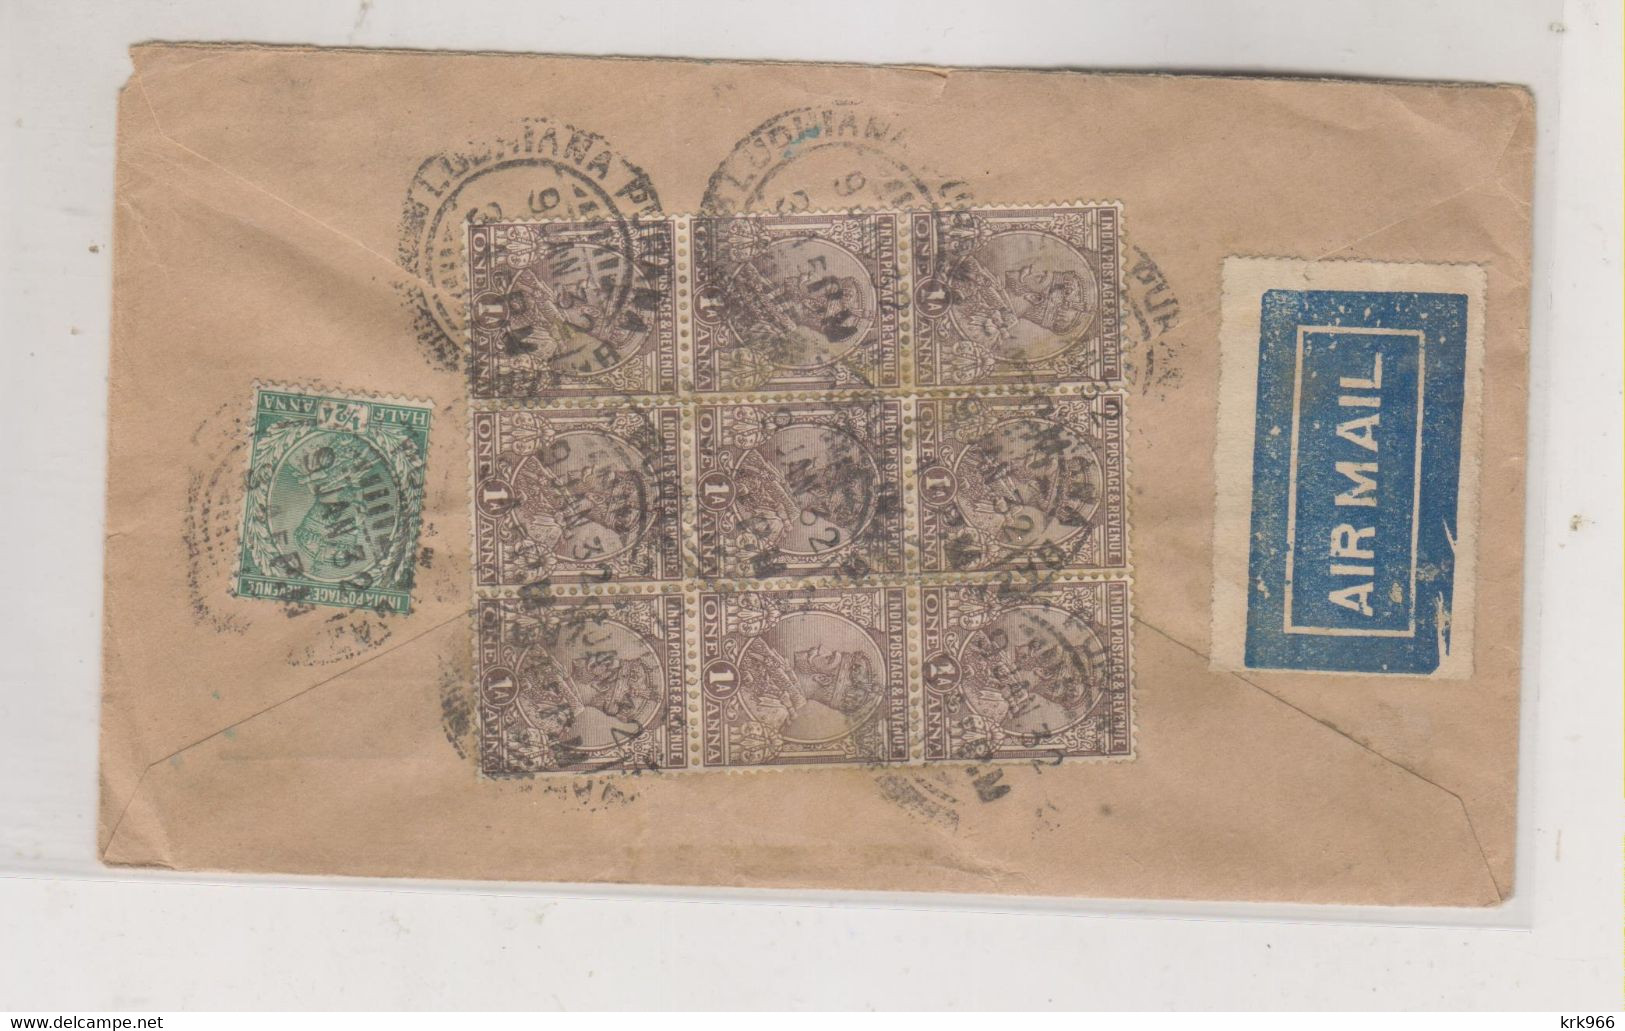 INDIA 1932 LUDHIANA PUNJAB Airmail Cover To Germany - Poste Aérienne